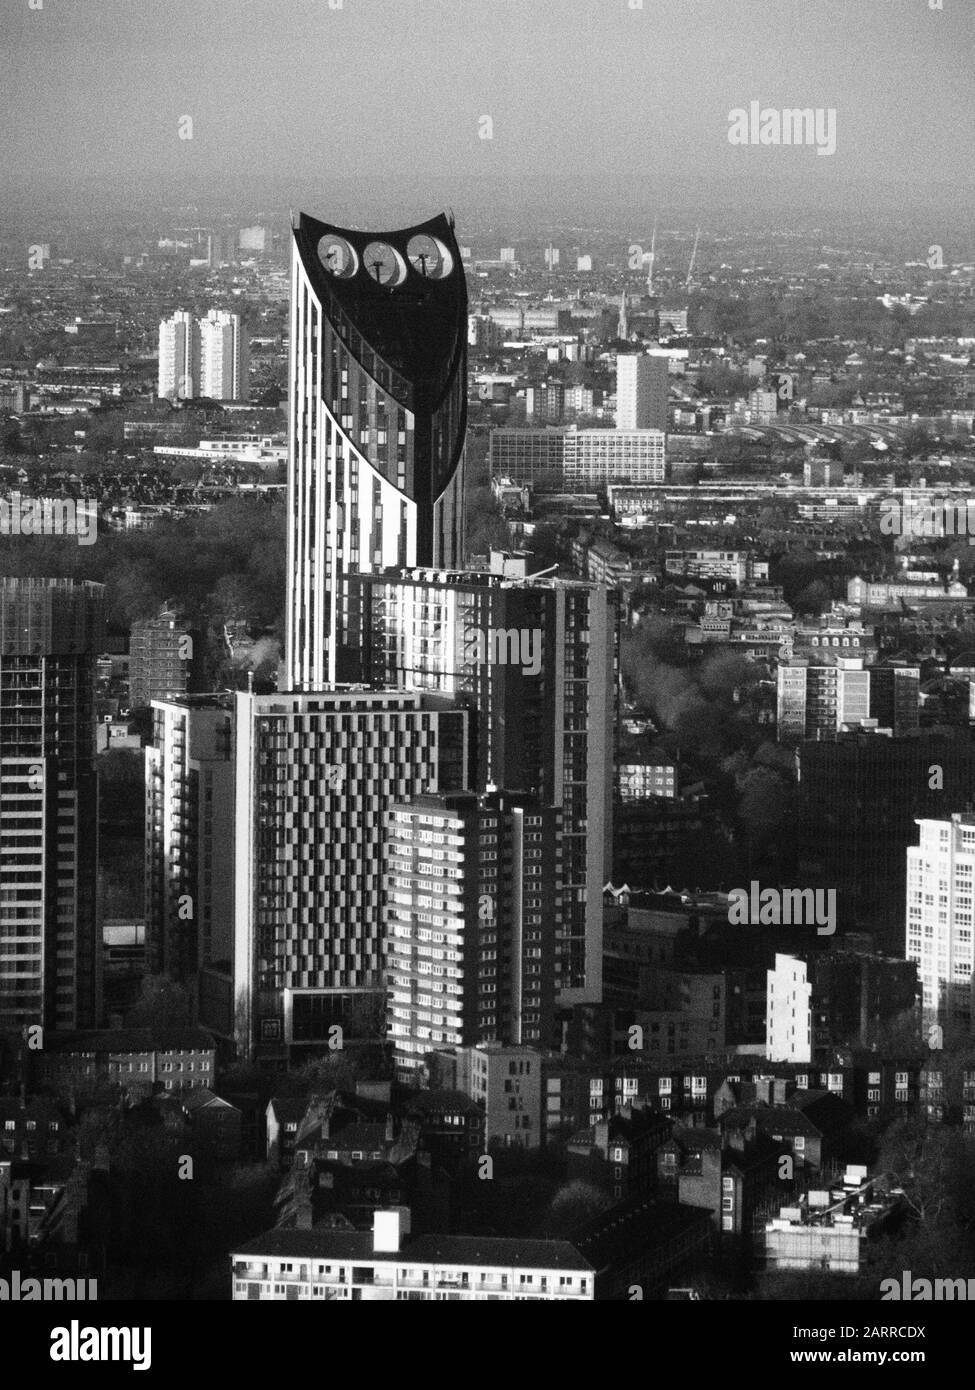 an artistic monochrome, black and white, of a skyscraper in London, viewed form high up Stock Photo